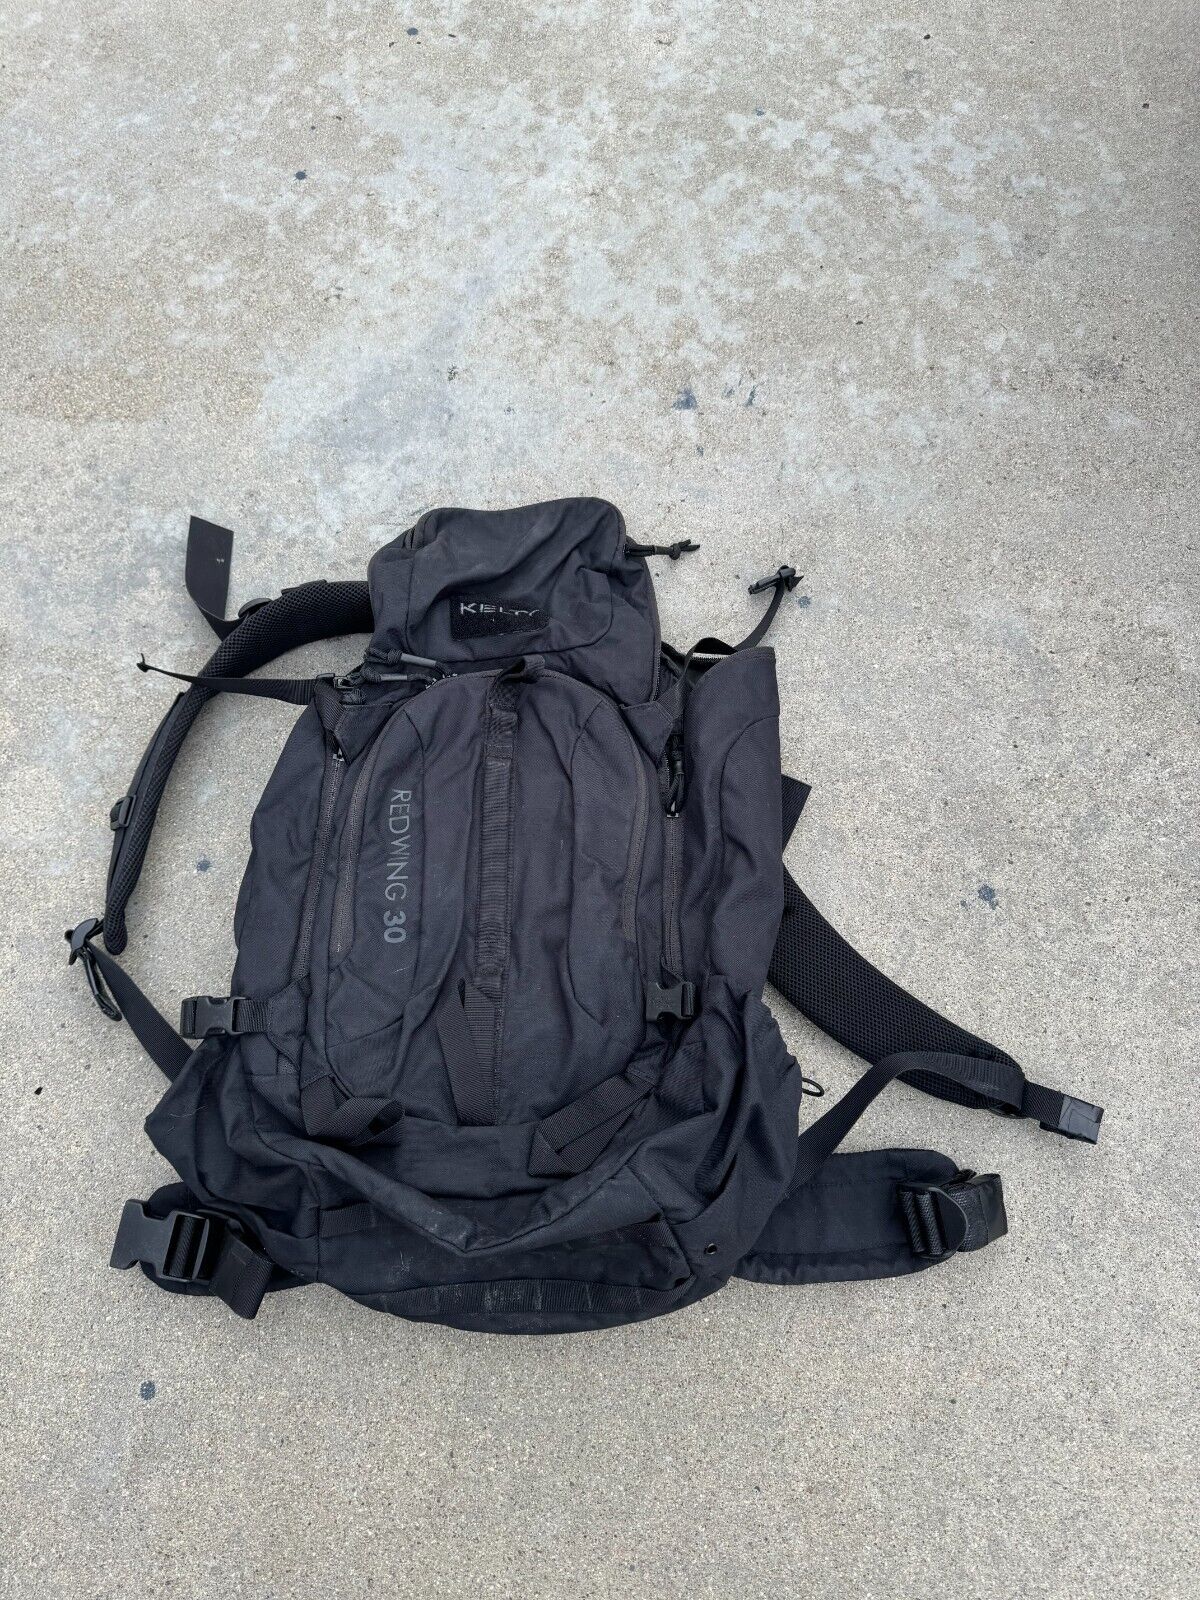 Kelty Redwing 30L Black Military Backpack